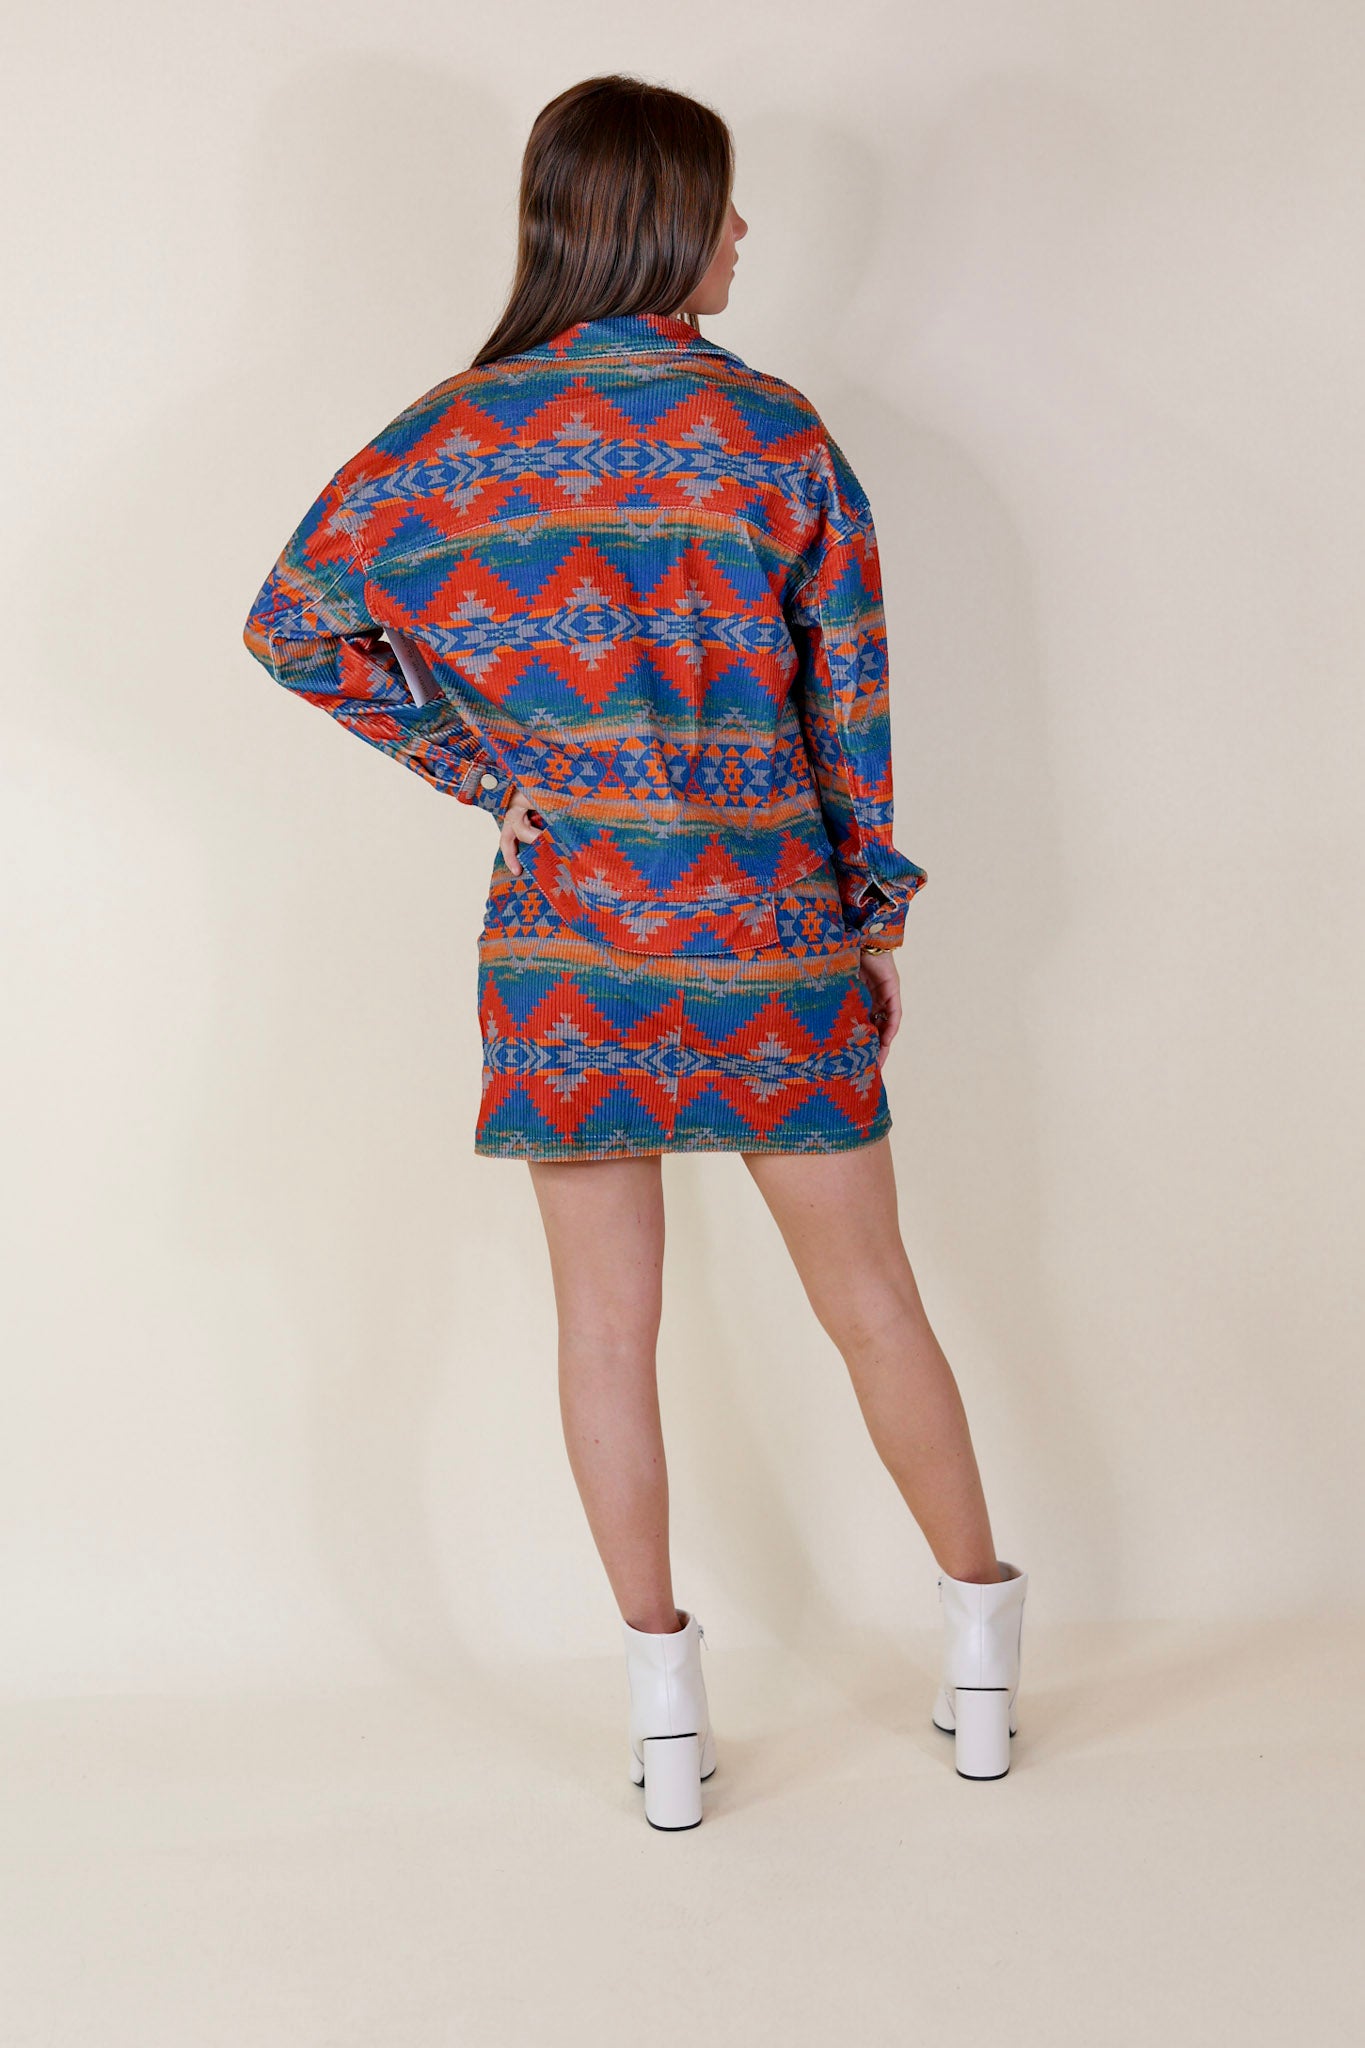 Edgy and Chic Aztec Print Skirt in Red and Blue - Giddy Up Glamour Boutique